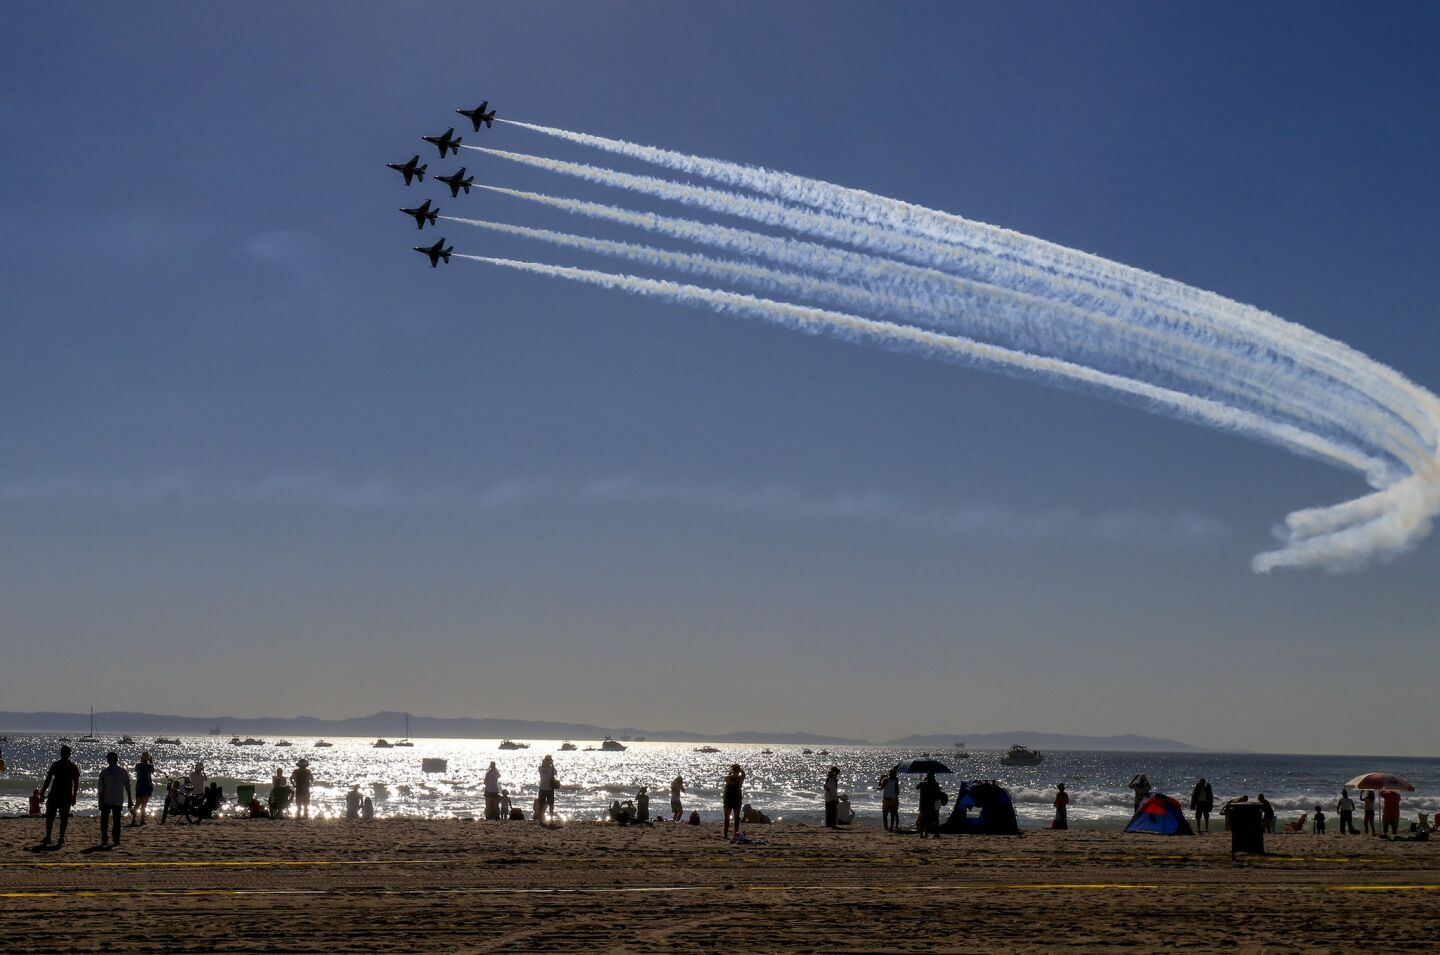 Great Pacific Airshow